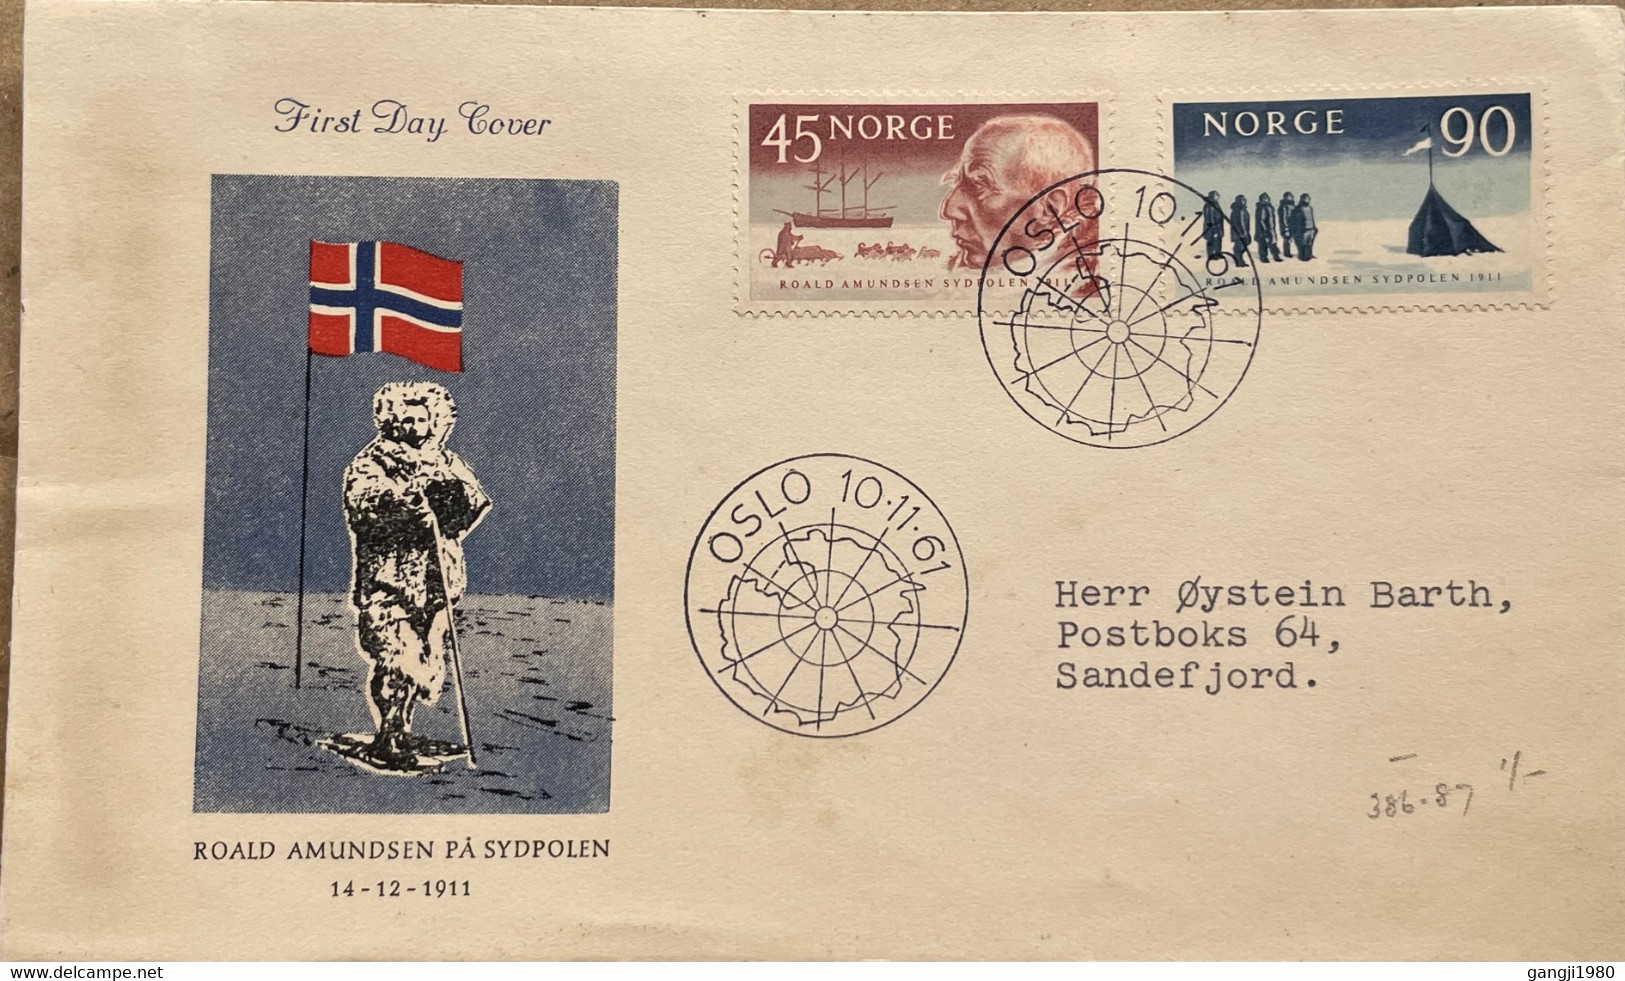 NORWAY 1961, FDC PRIVATE COVER, ILLUSTRATE FLAG, AMUNDSEN'S ARRIVAL AT SOUTH POLE, PARTY & TENT, 2 STAMP, OSLO CITY CANC - Cartas & Documentos